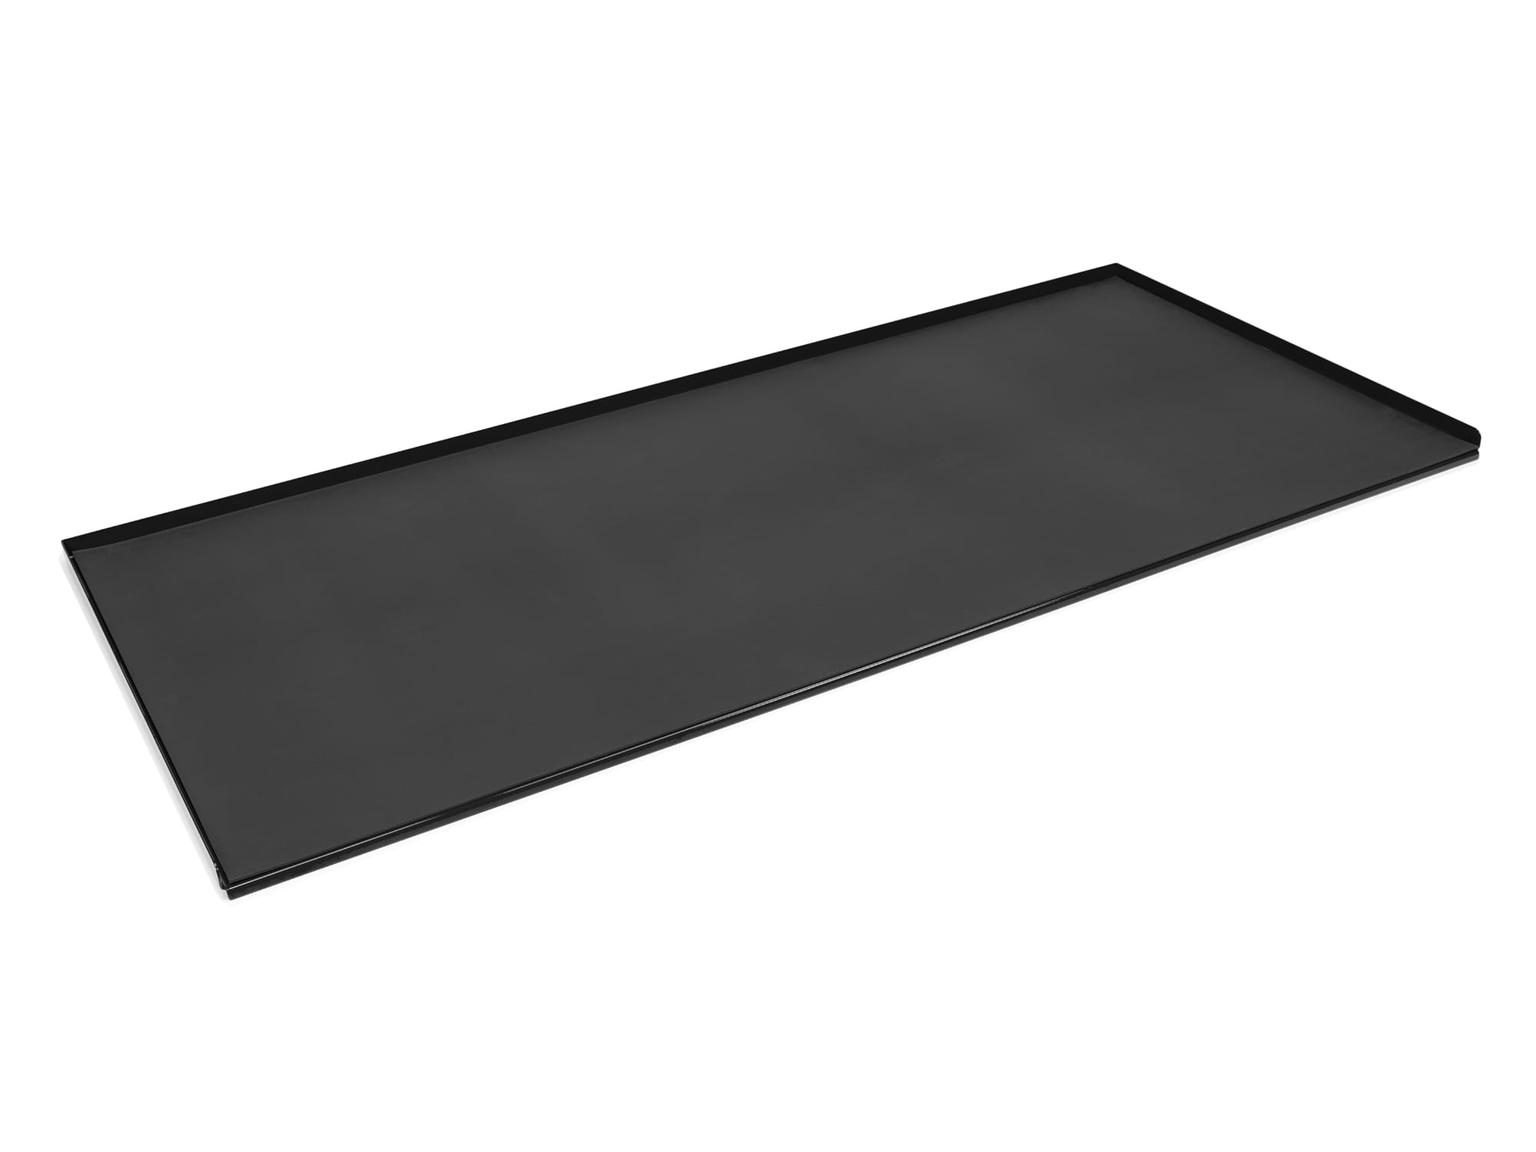 TEKTON OCT63110-T Black Painted Steel Top with Rubber Mat (60 W x 27 D in.)